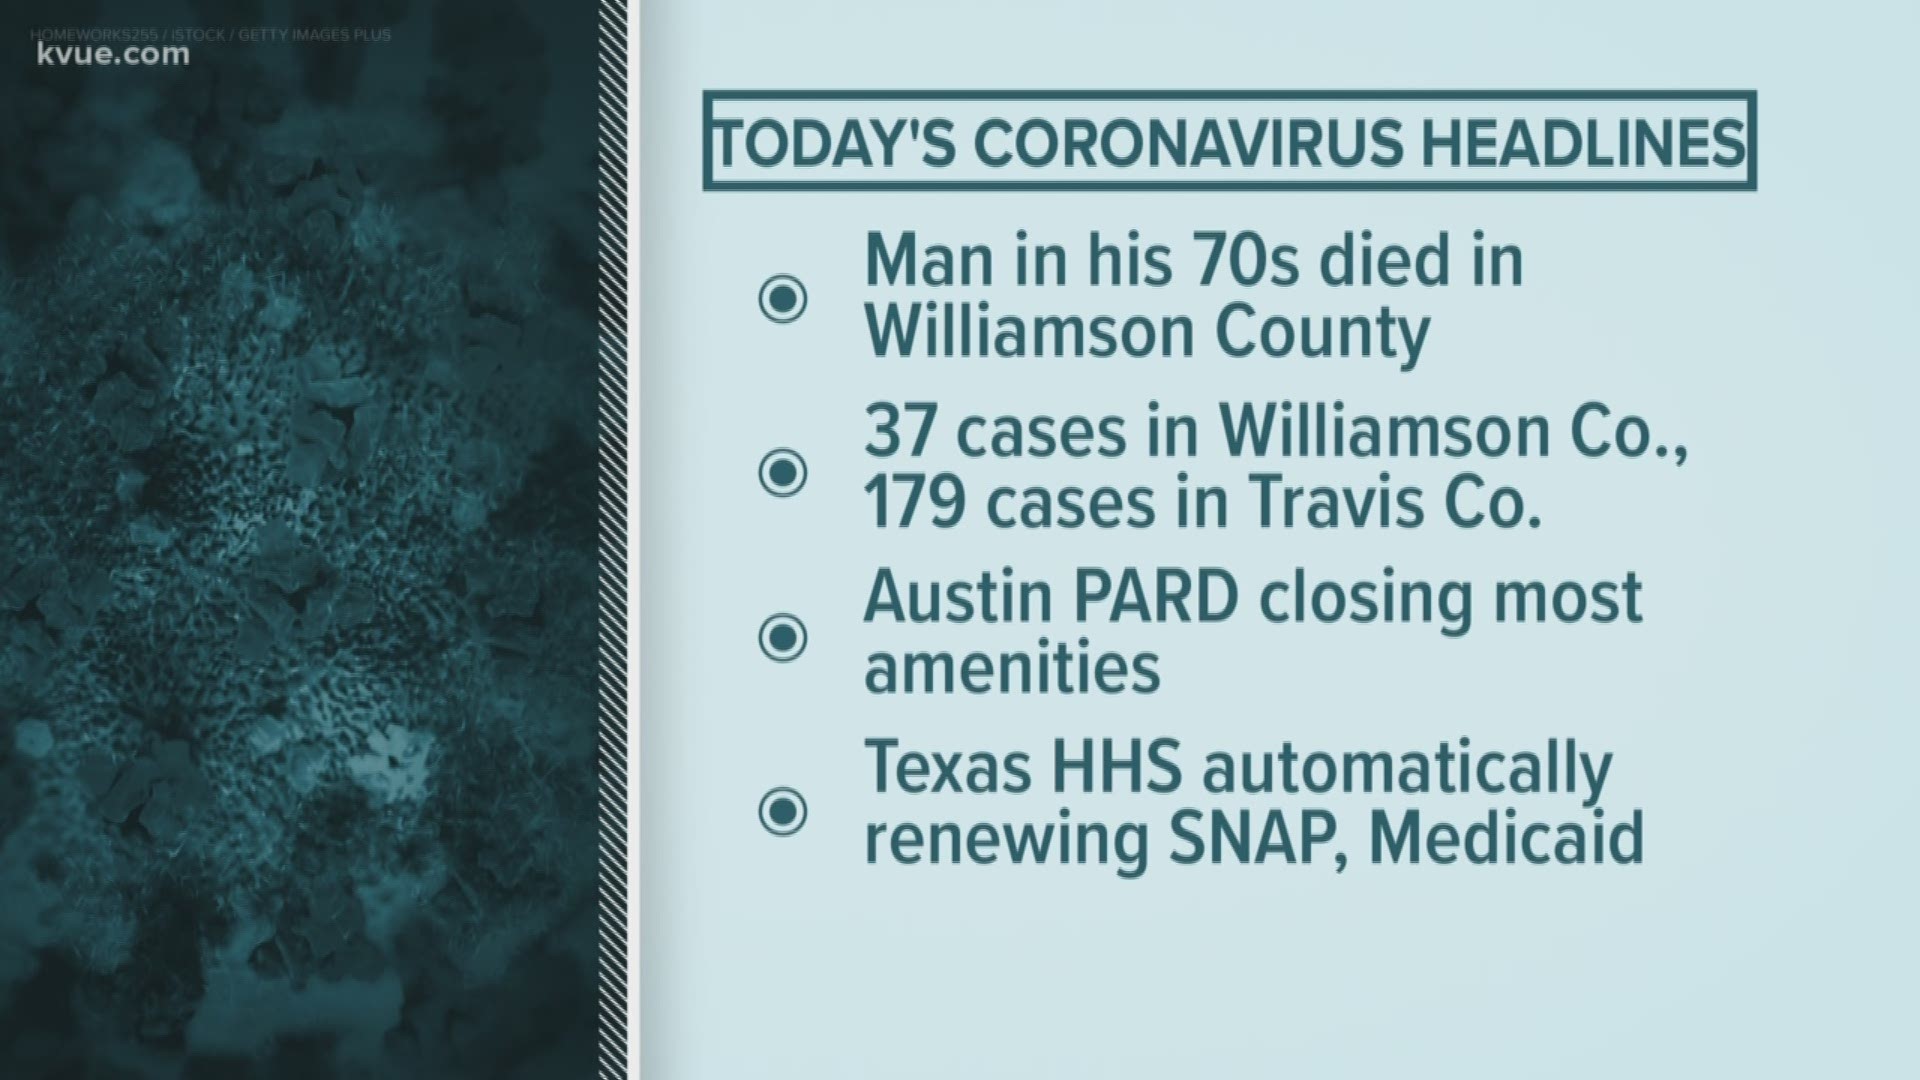 These are the top coronavirus headlines for March 28.